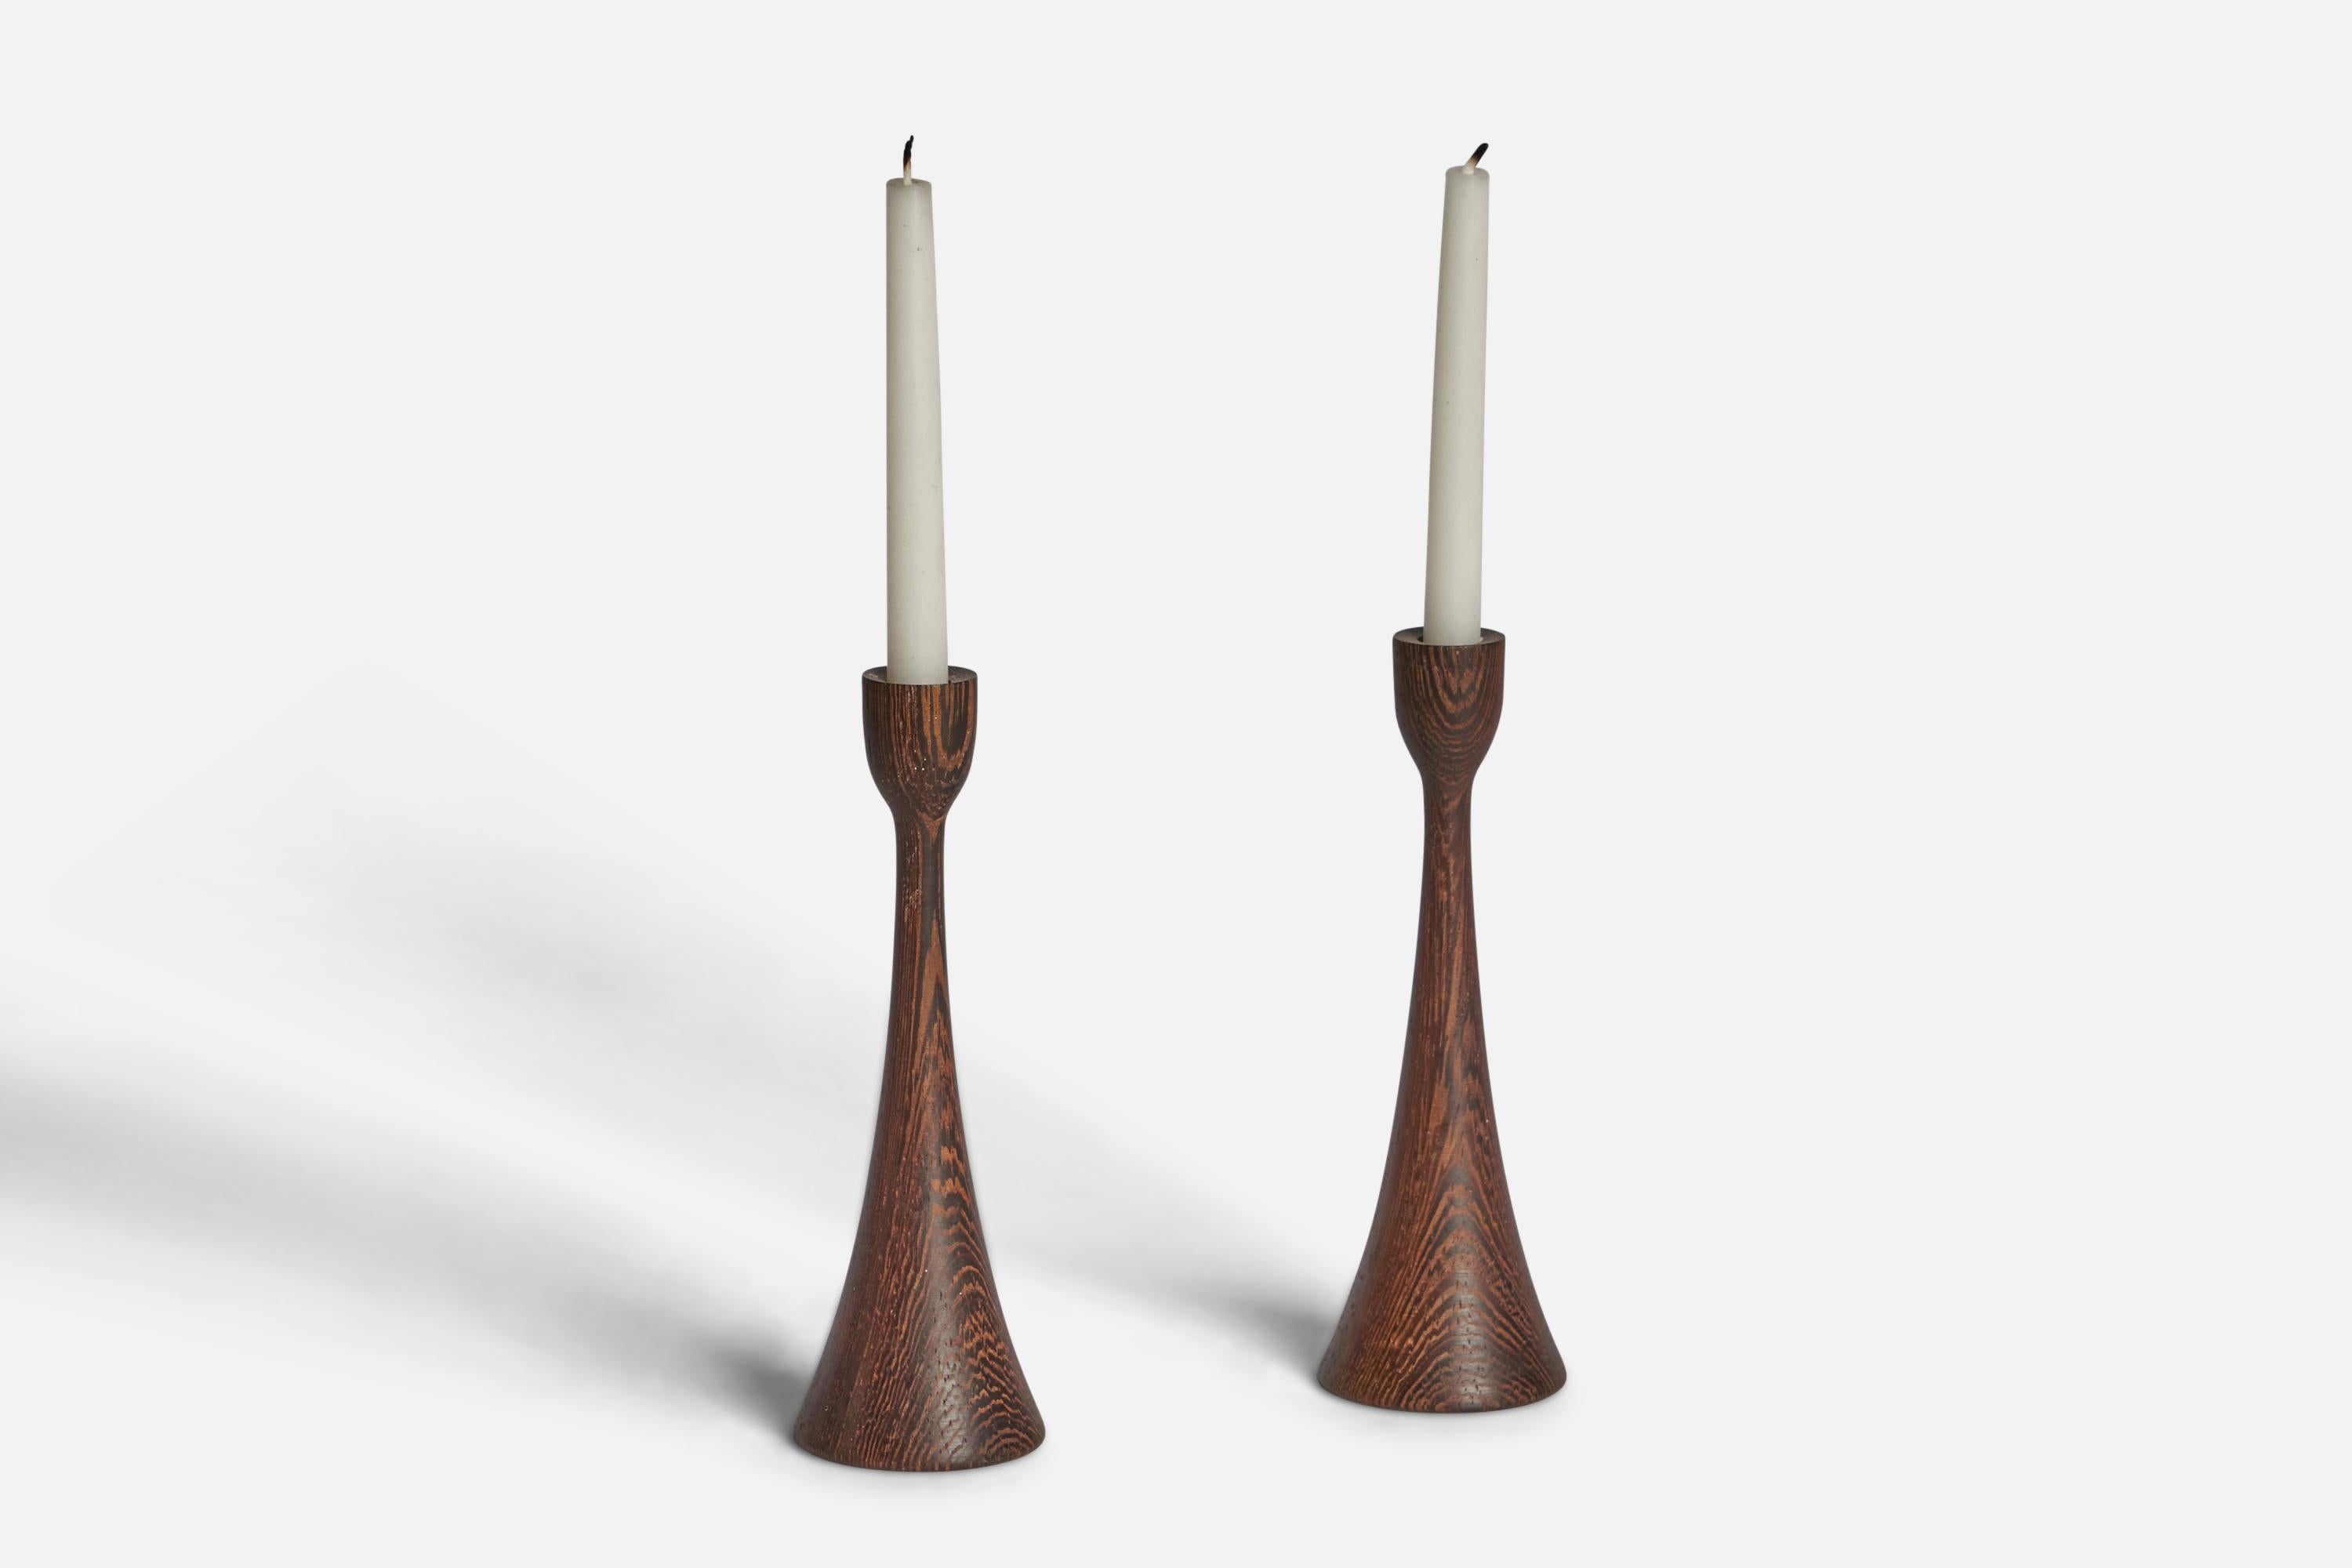 A pair of small wenge candlesticks designed and produced in Denmark, 1950s.

Fits 0.45” diameter candles
”DENMARK“ stamp on bottom